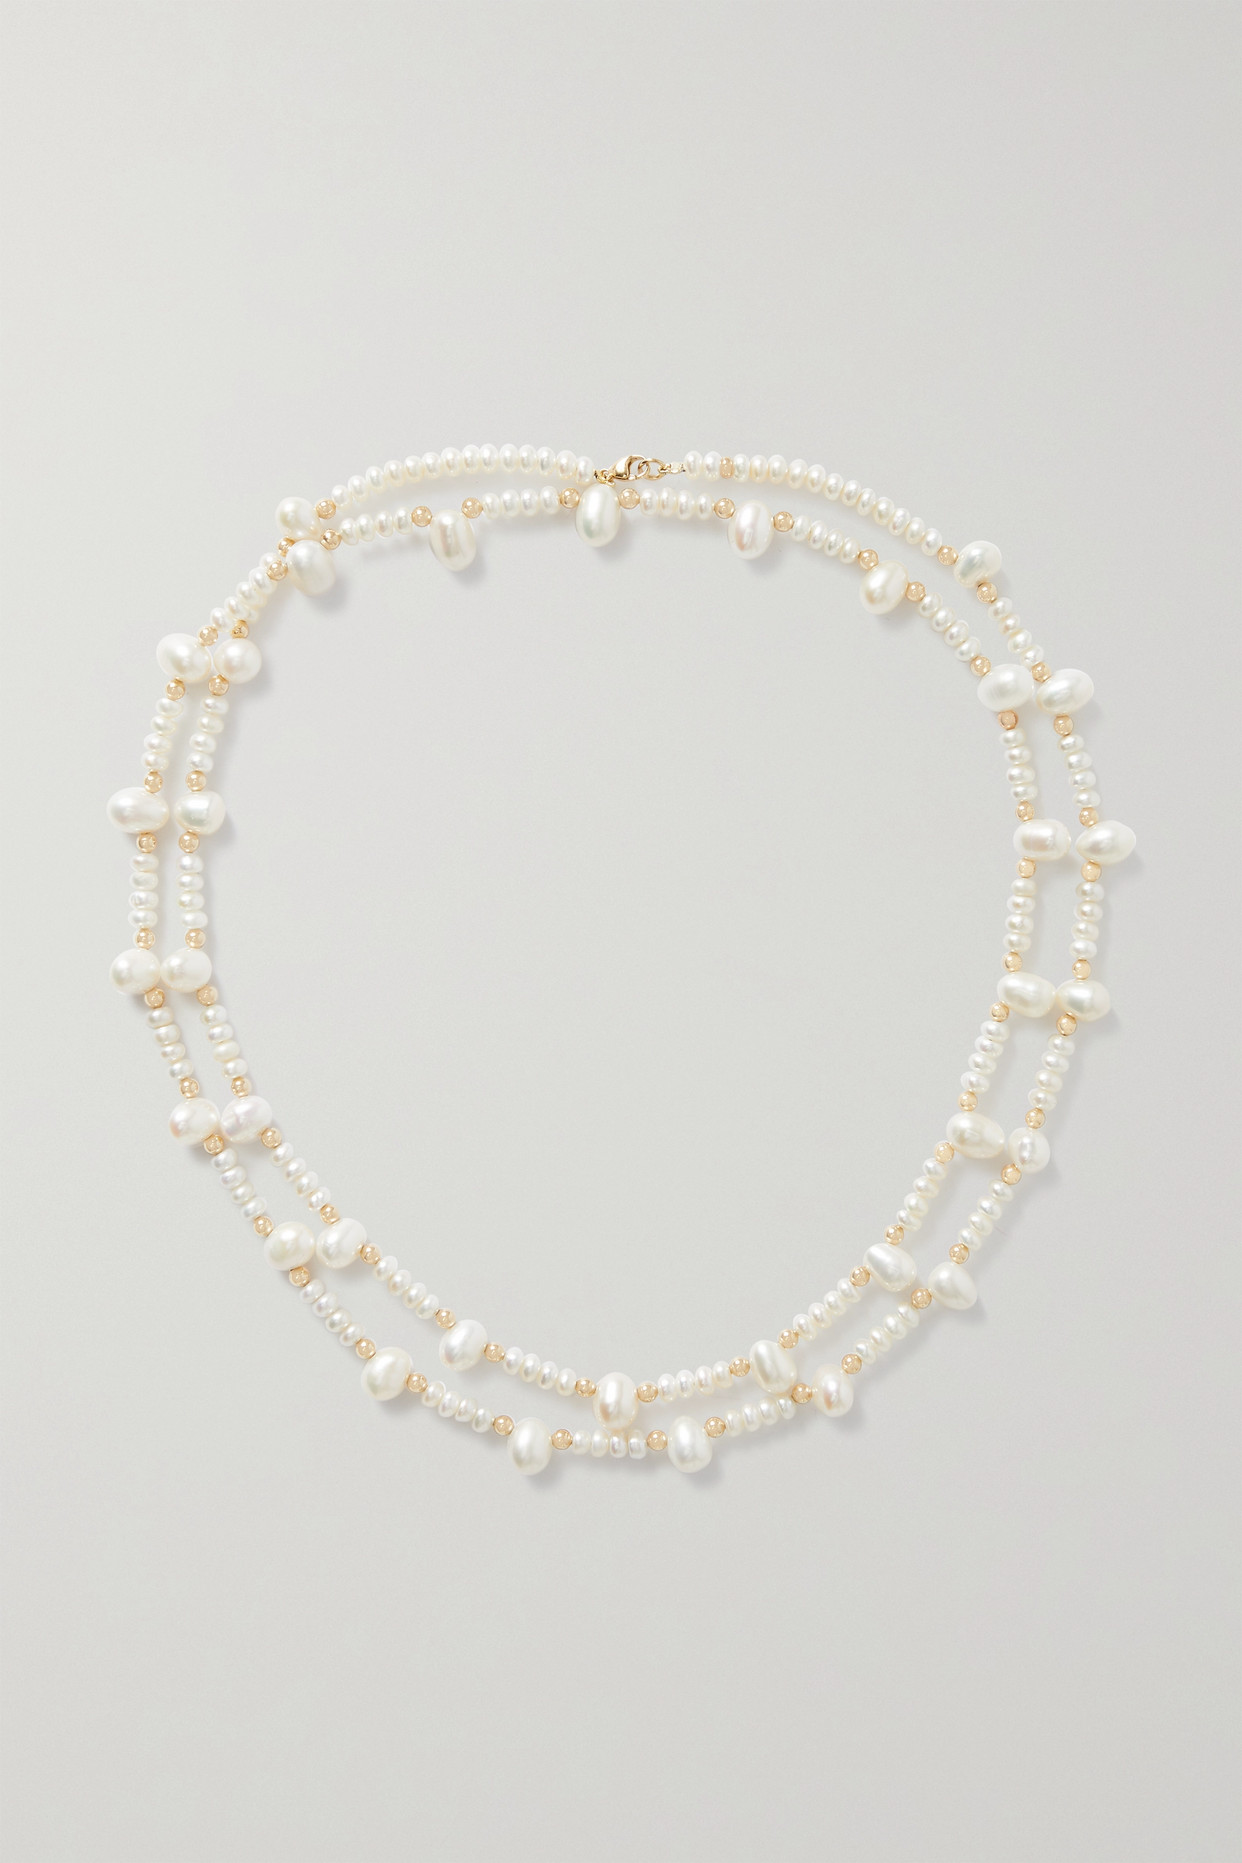 + Net Sustain Gold Pearl Necklace